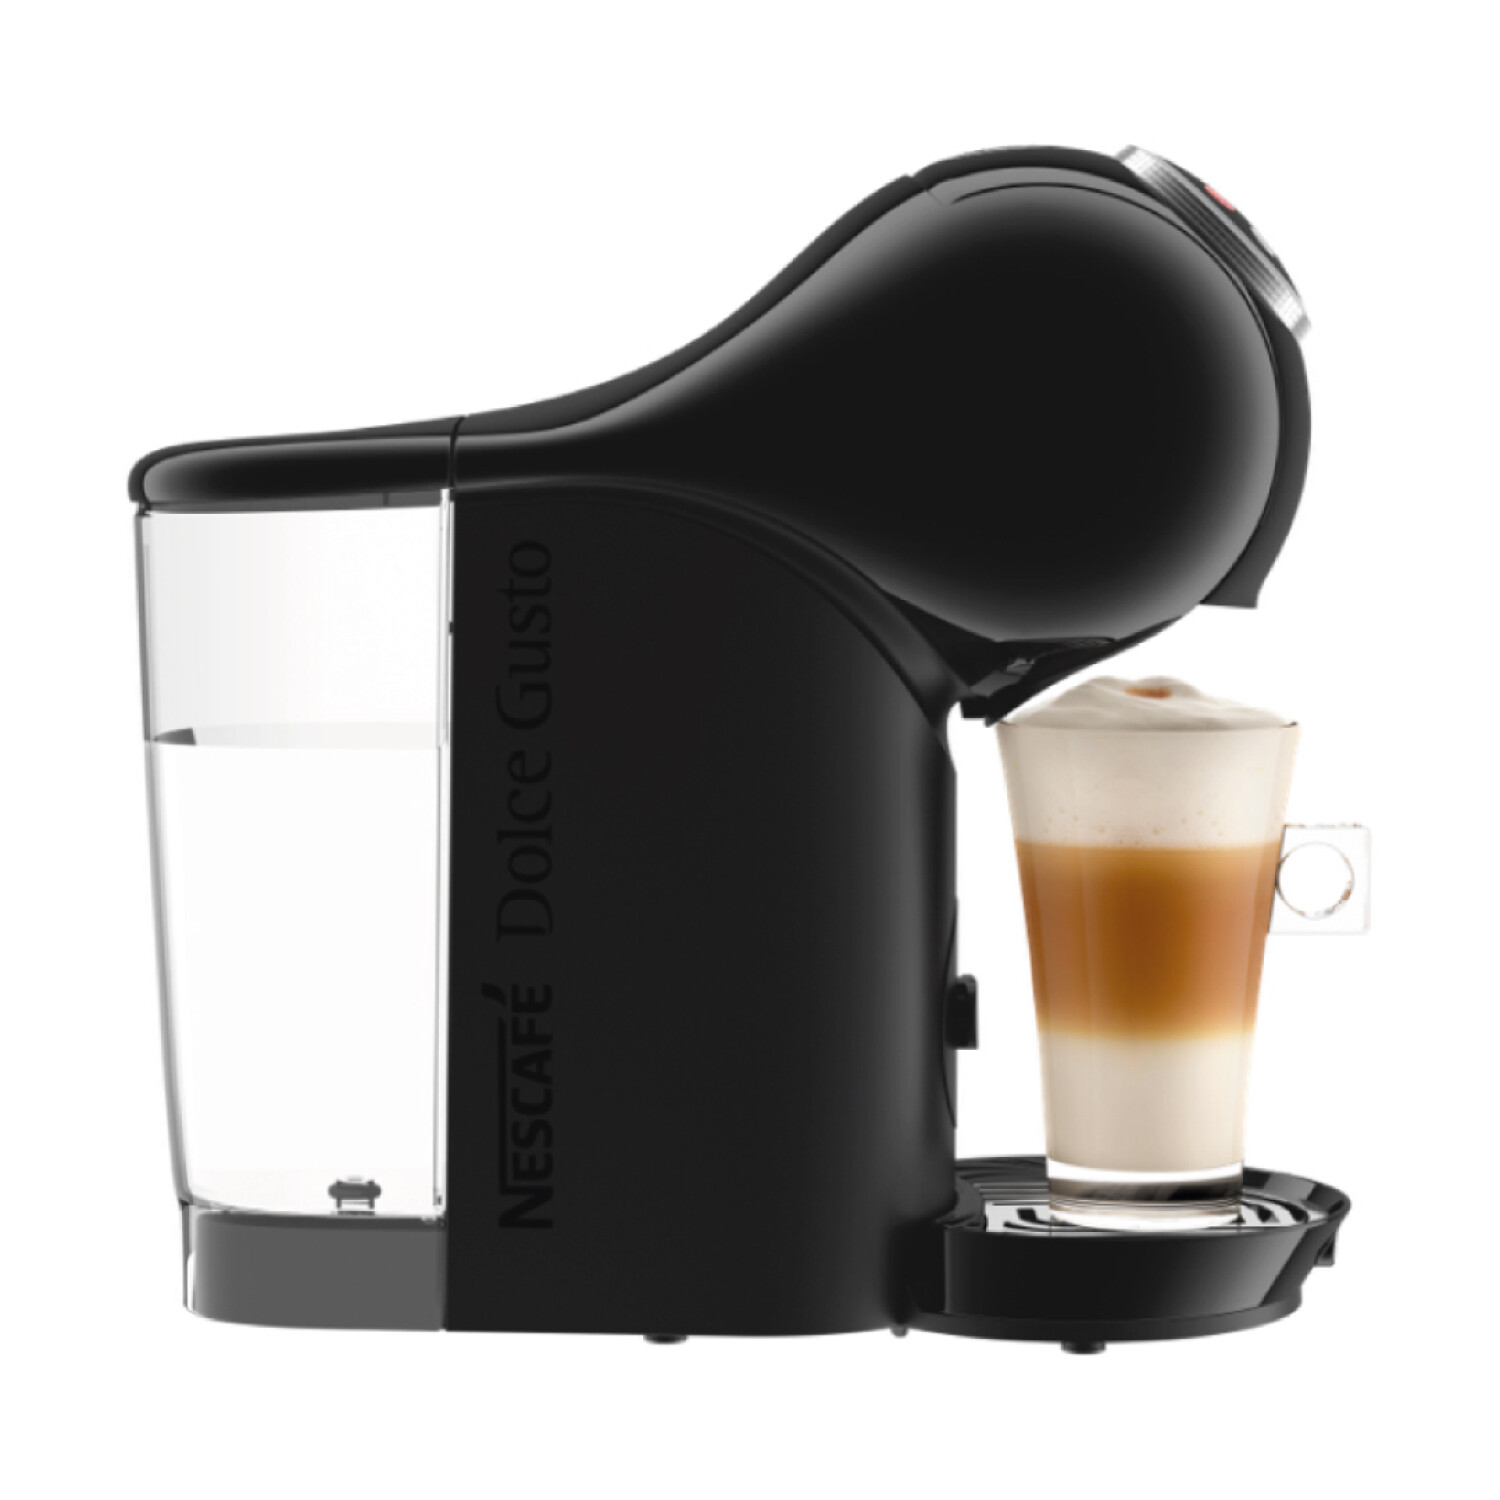 Cafetera Dolce Gusto Genio basic white PV240158 Moulinex